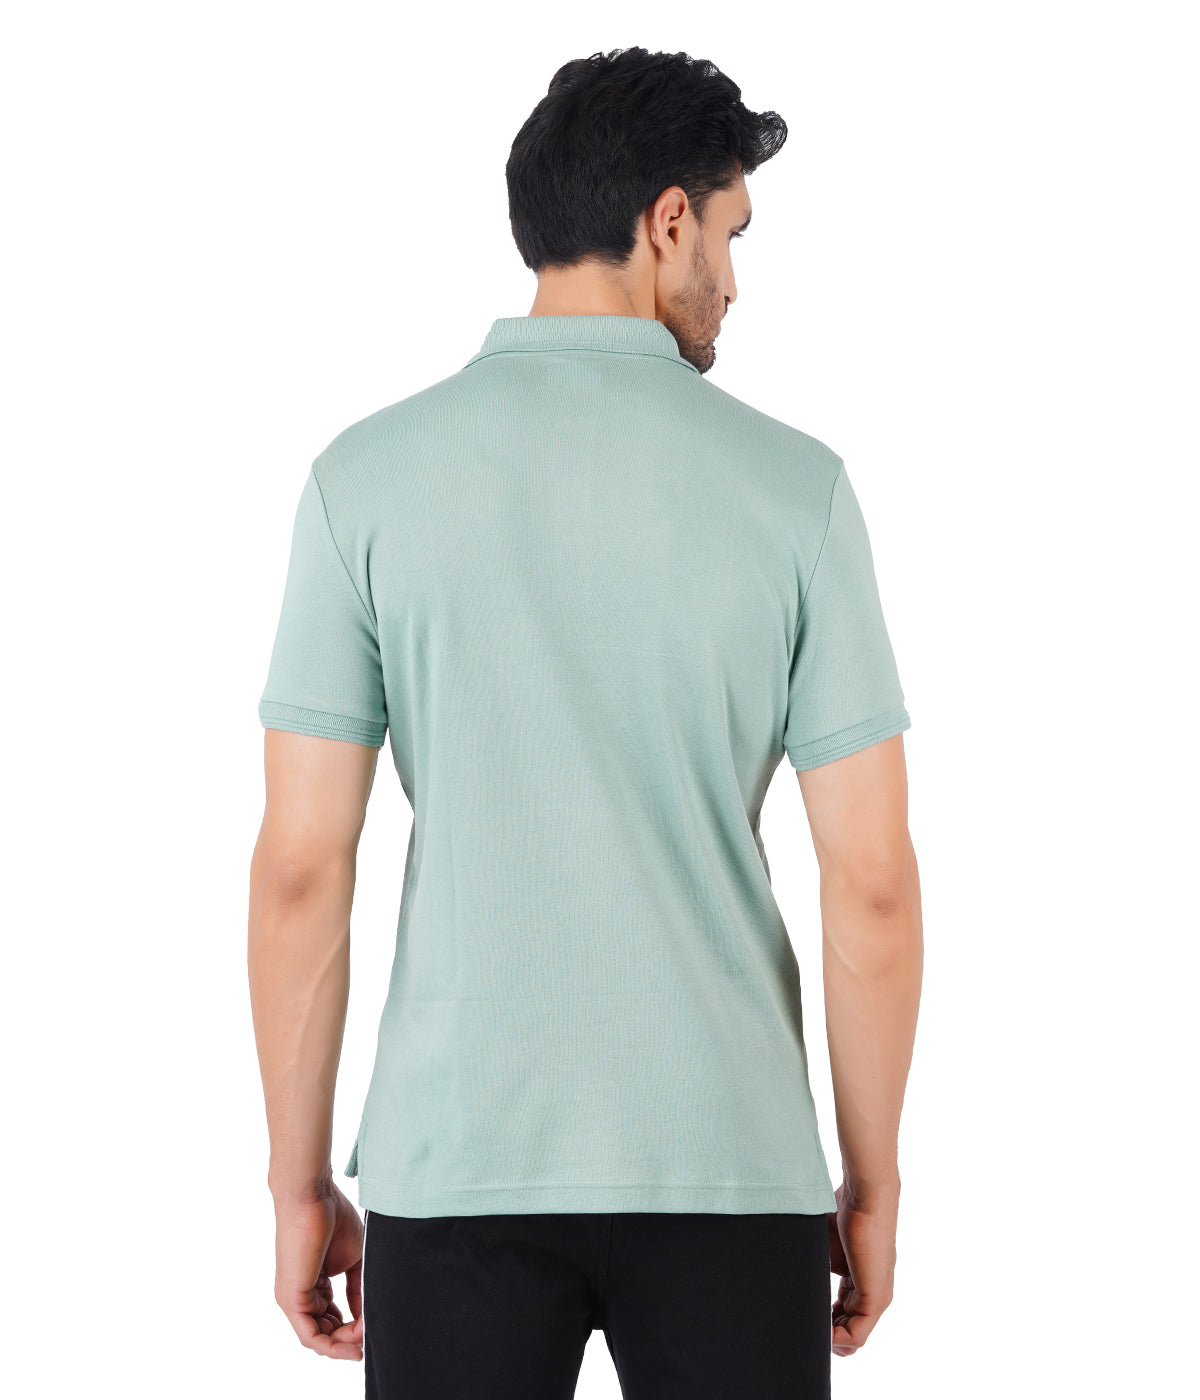 Men's Mint Green Super Combed Cotton Half Sleeves Polo T-Shirt-Back view